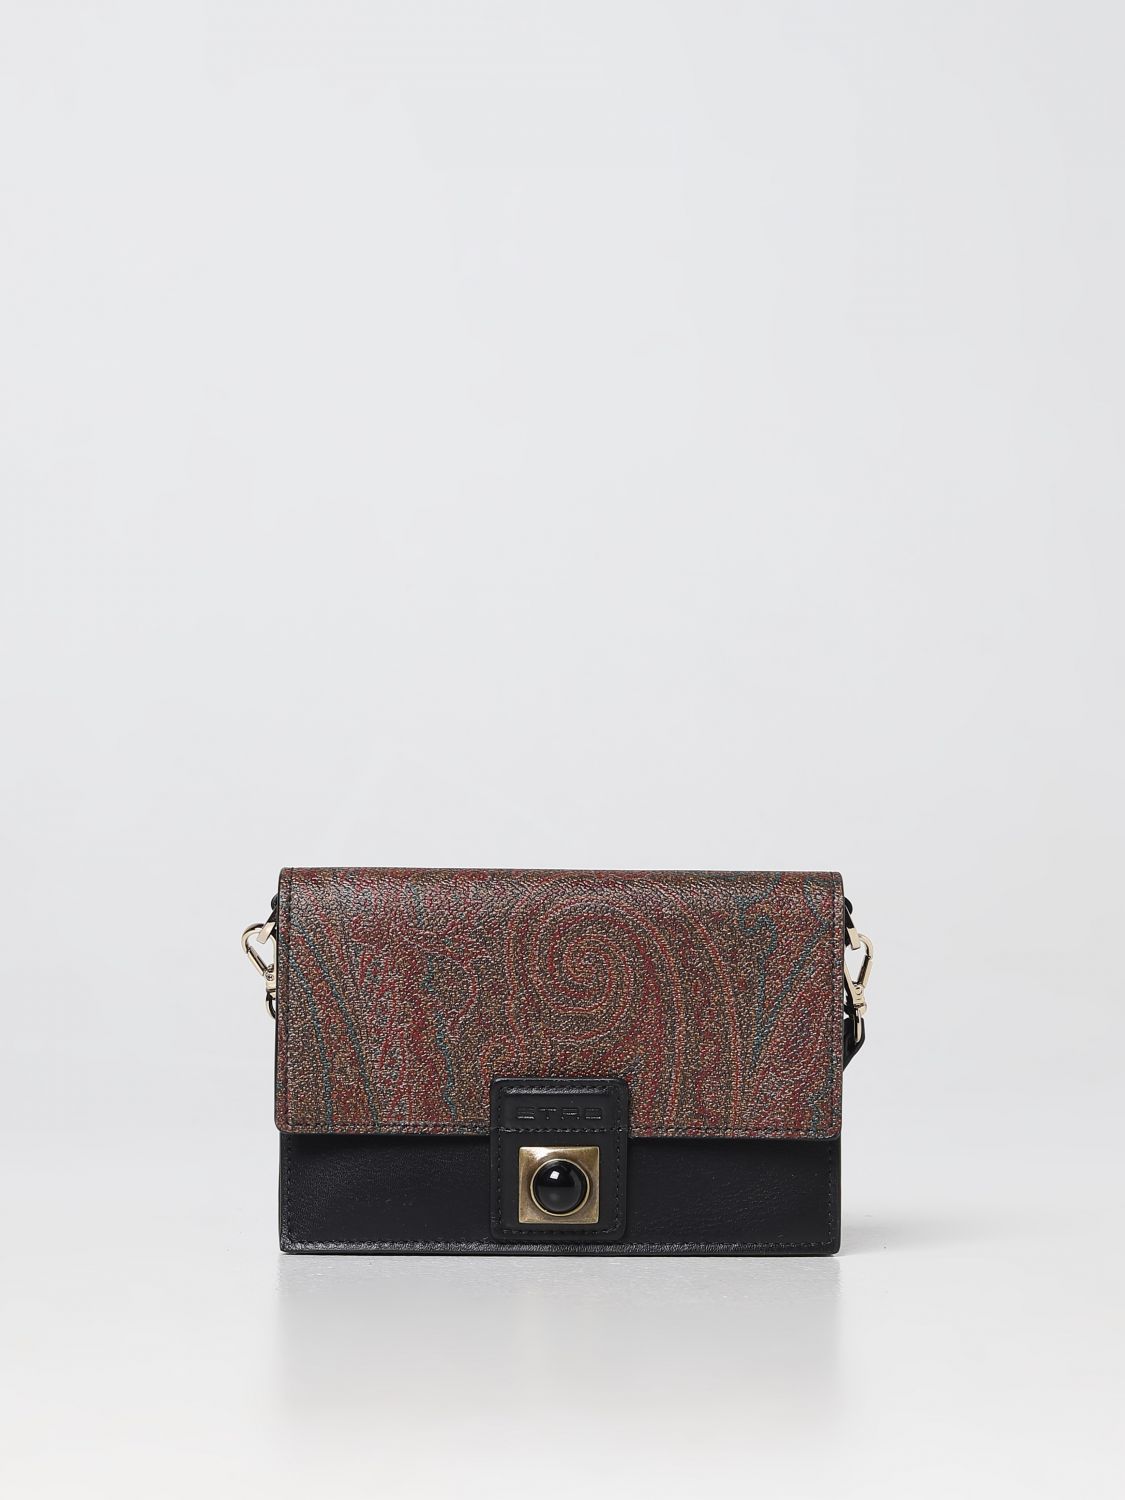 ETRO: Crown Me bag in leather and coated Paisley - Black | Etro mini ...